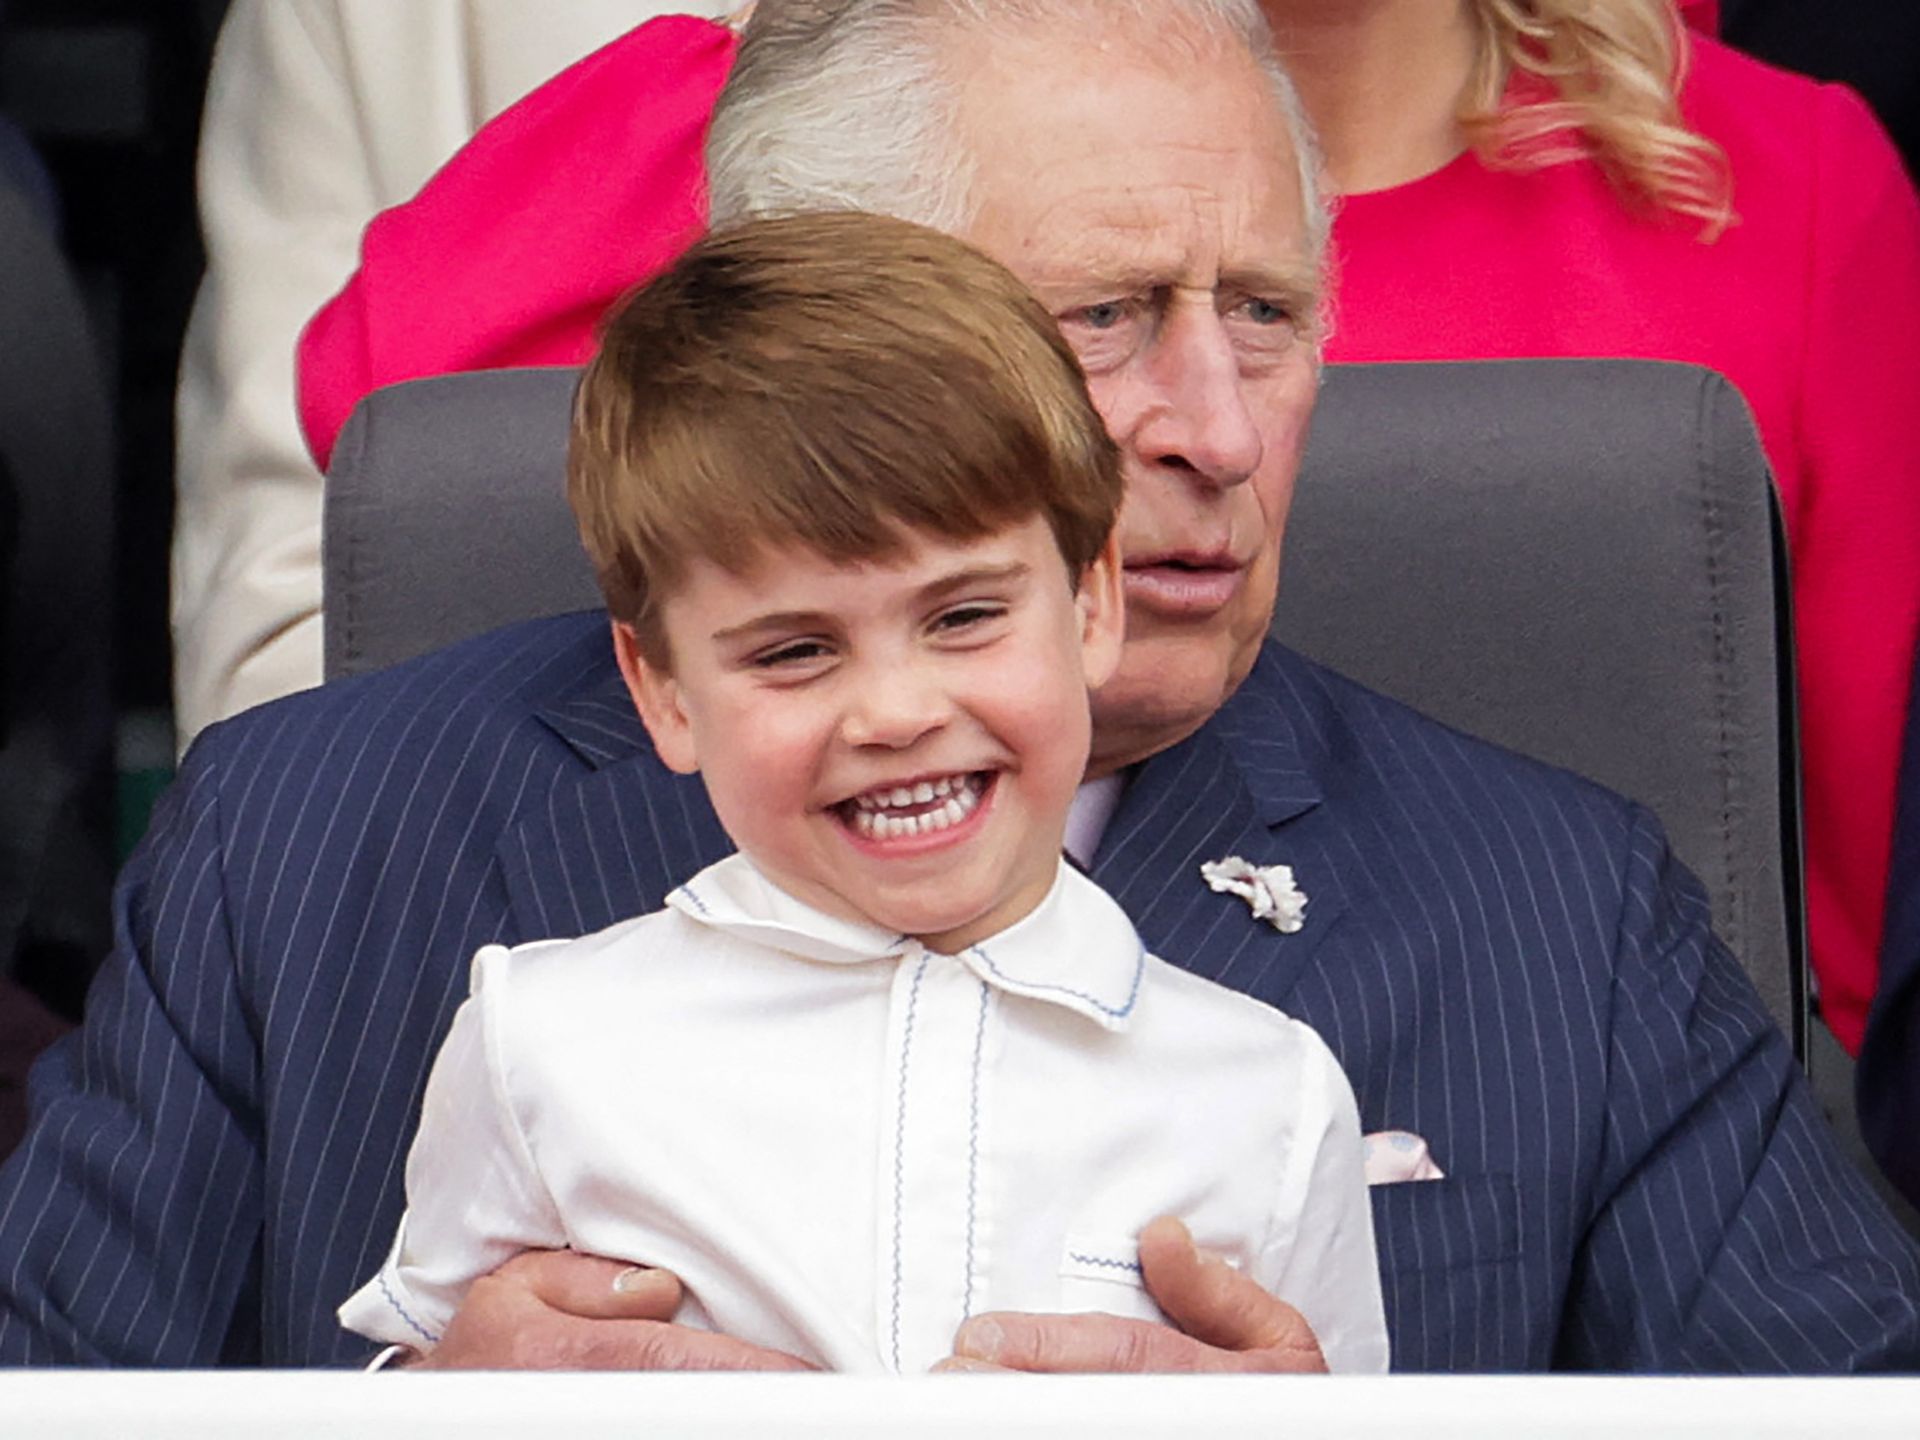 Prince Louis climbs onto grandpa King Charles' lap in the sweetest ...